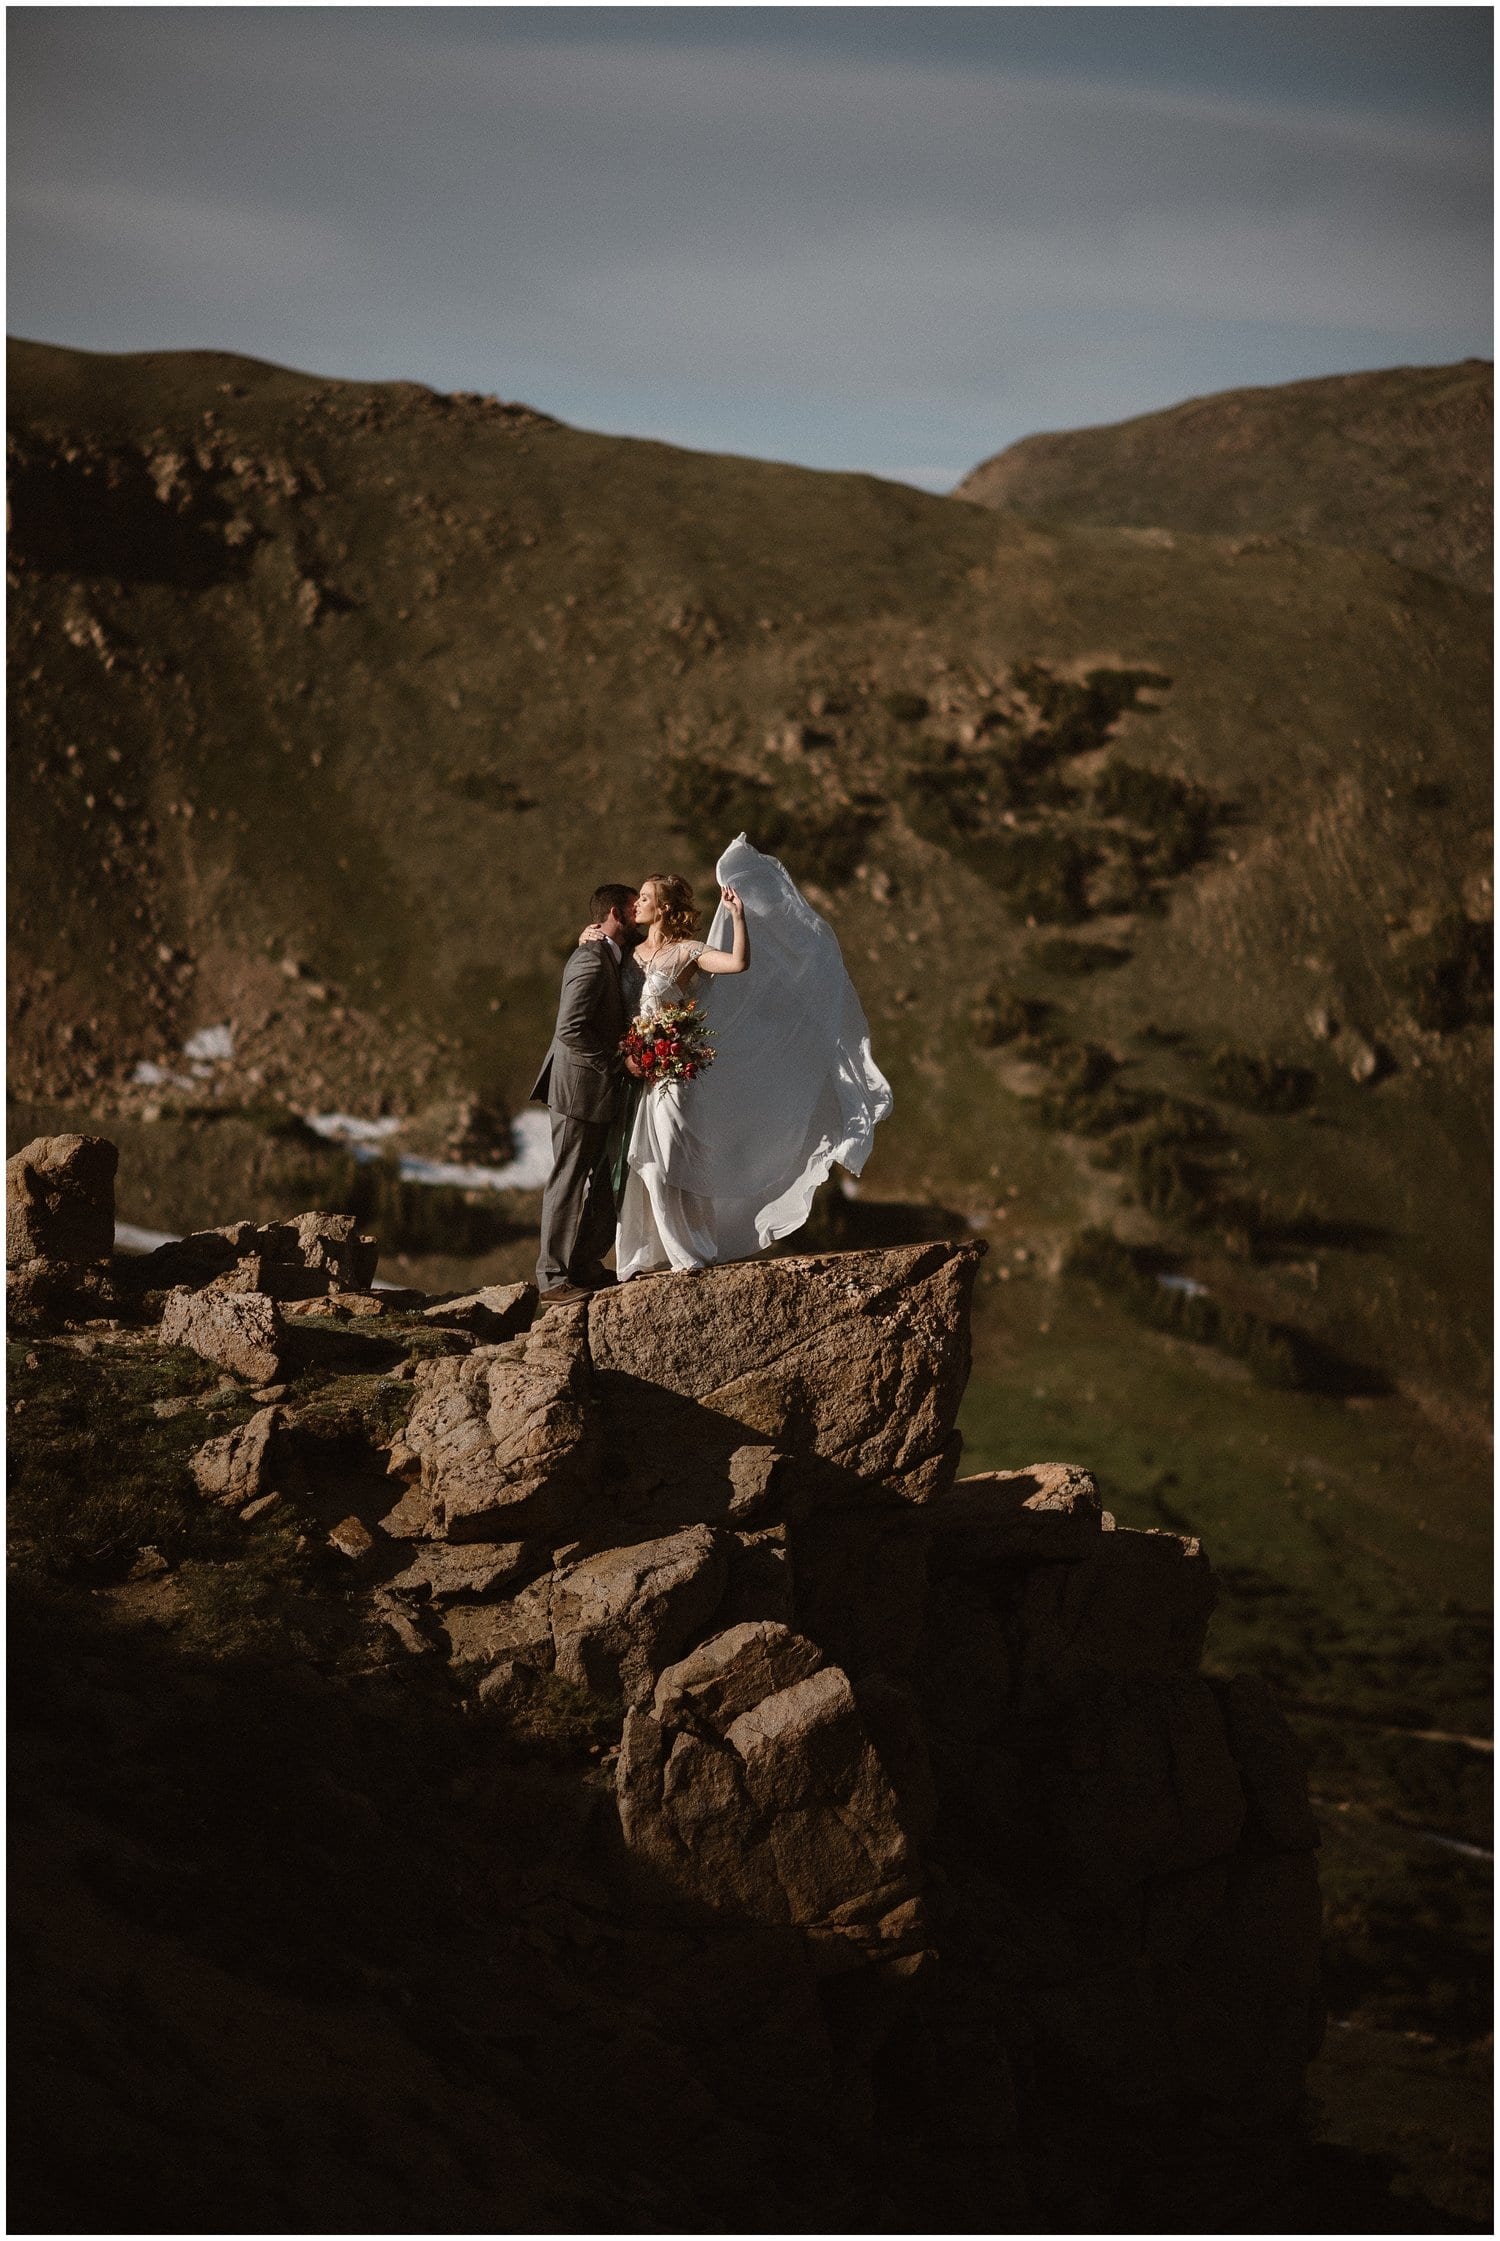 Bride and groom embrace on a cliff on their elopement day. The bride's dress flows in the wind behind her. 